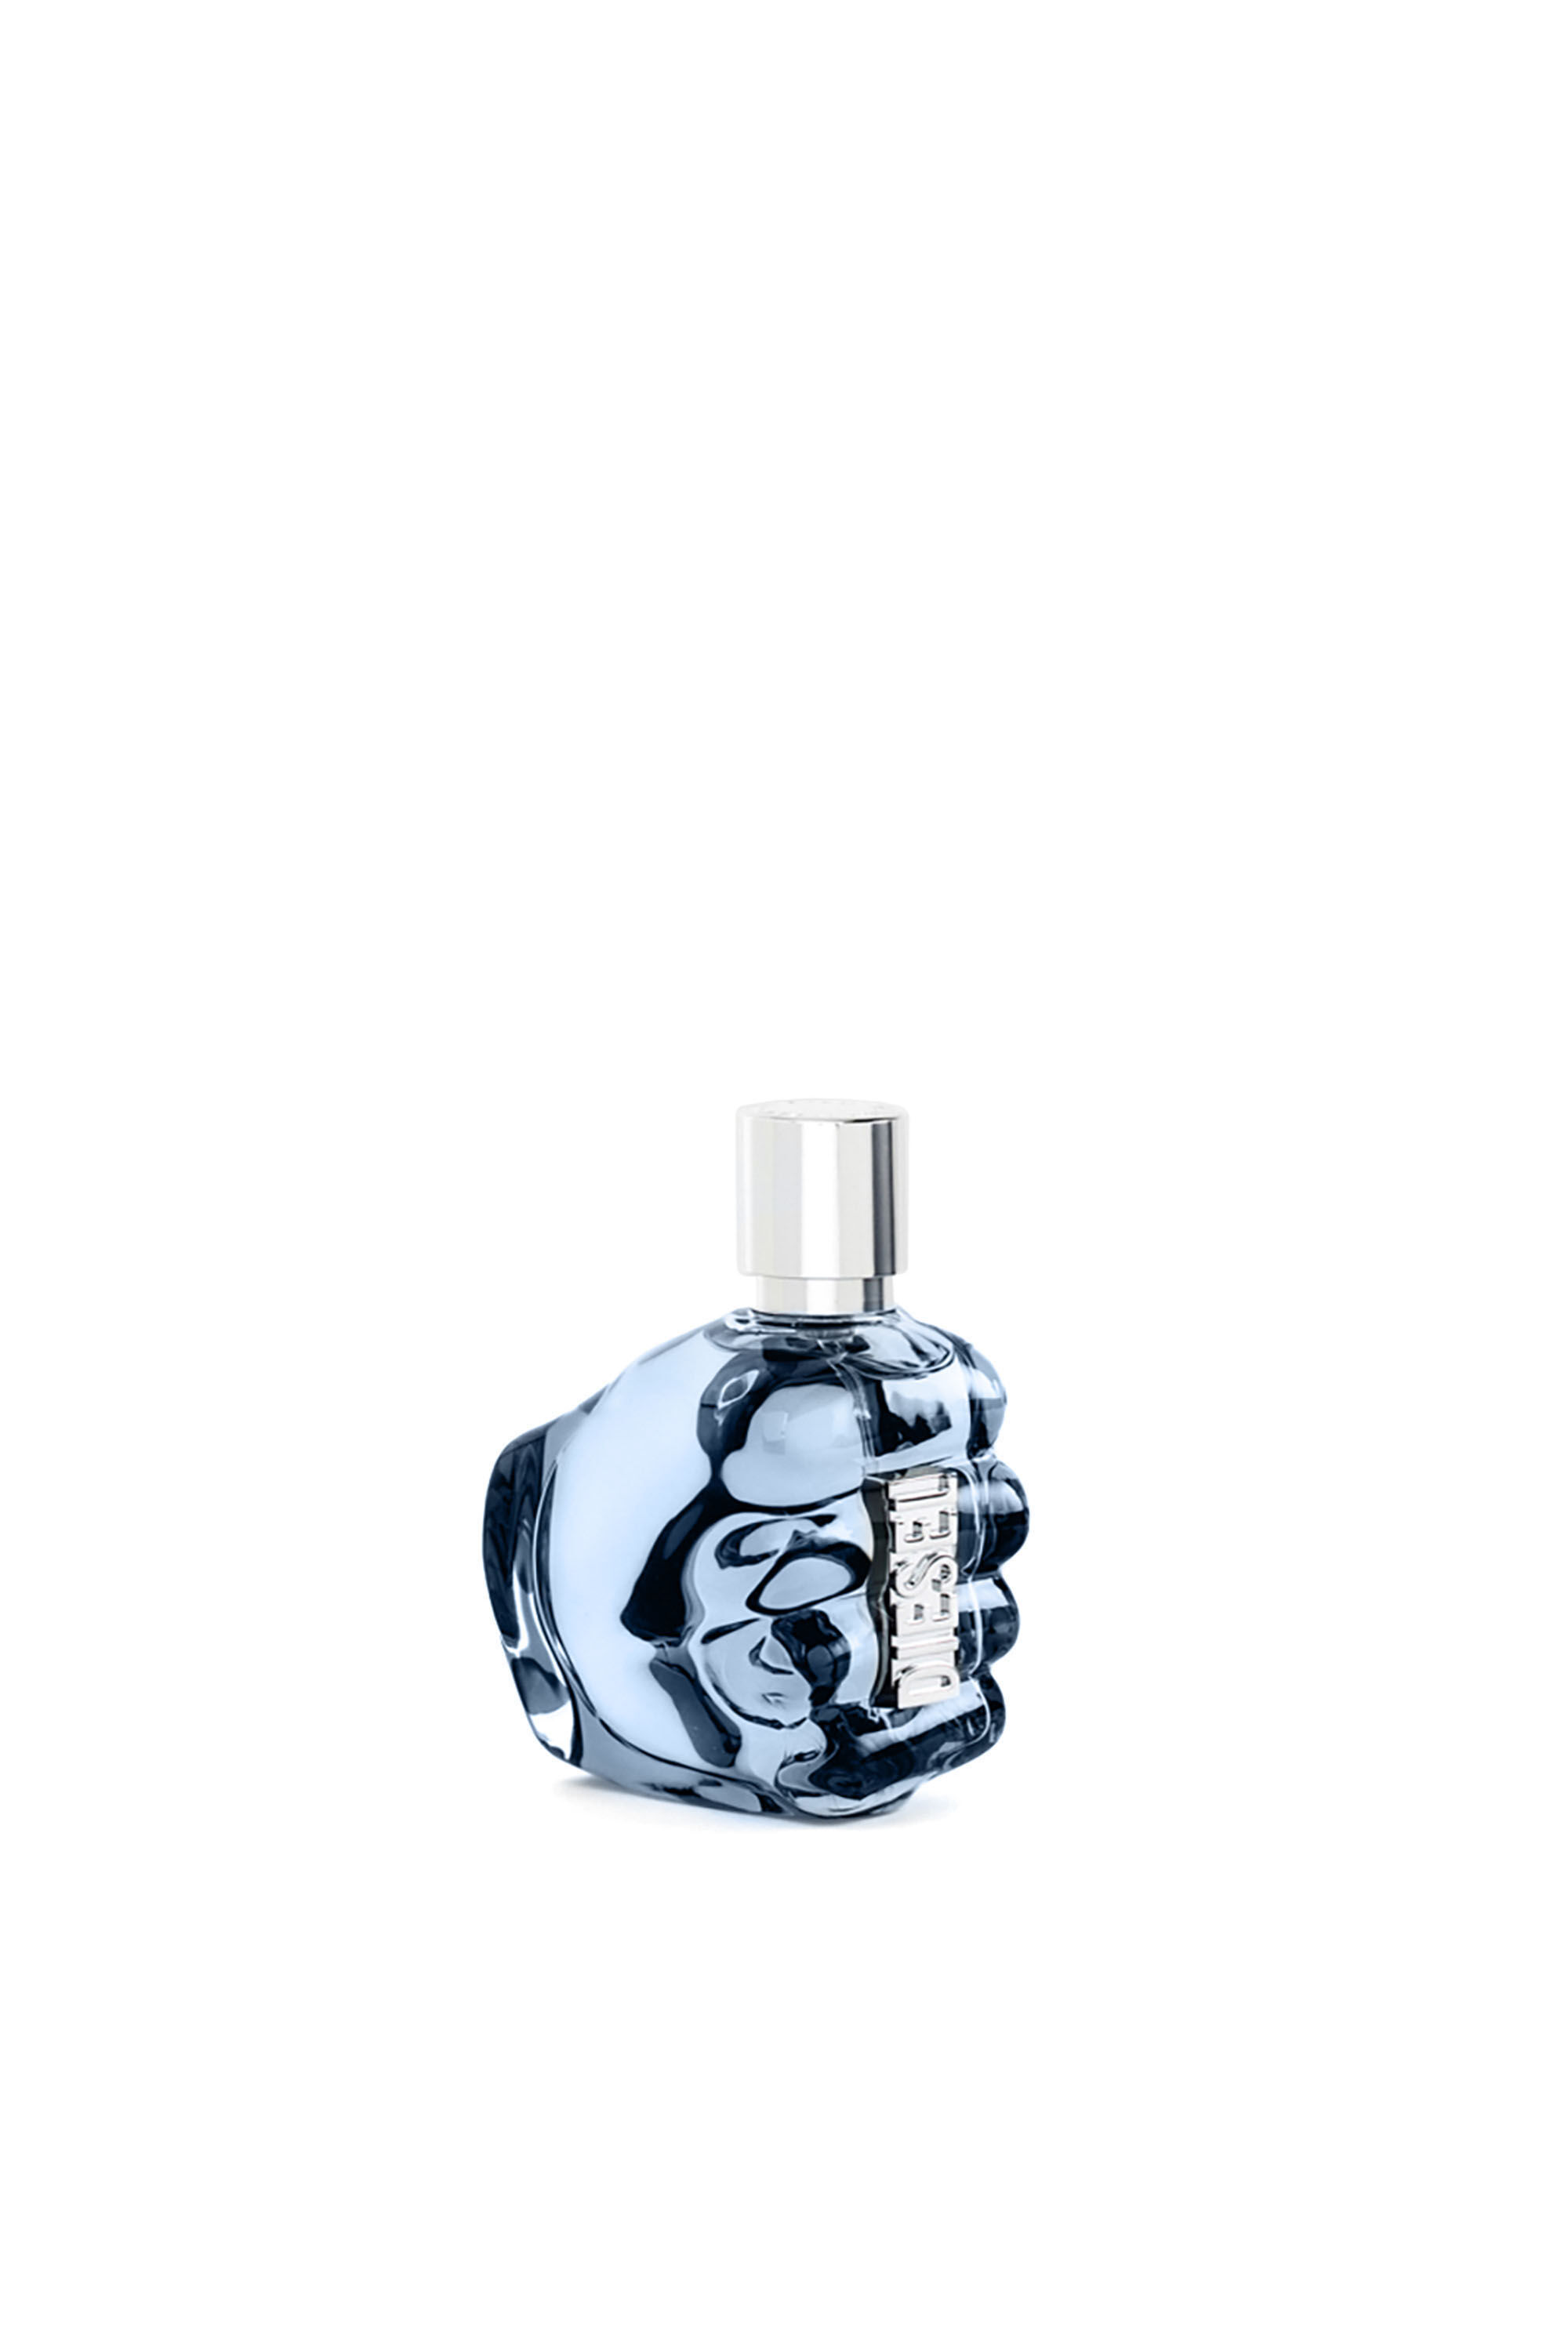 Diesel - ONLY THE BRAVE 50ML, Uomo Only The Brave 50ml, Eau de Toilette in Blu - Image 1